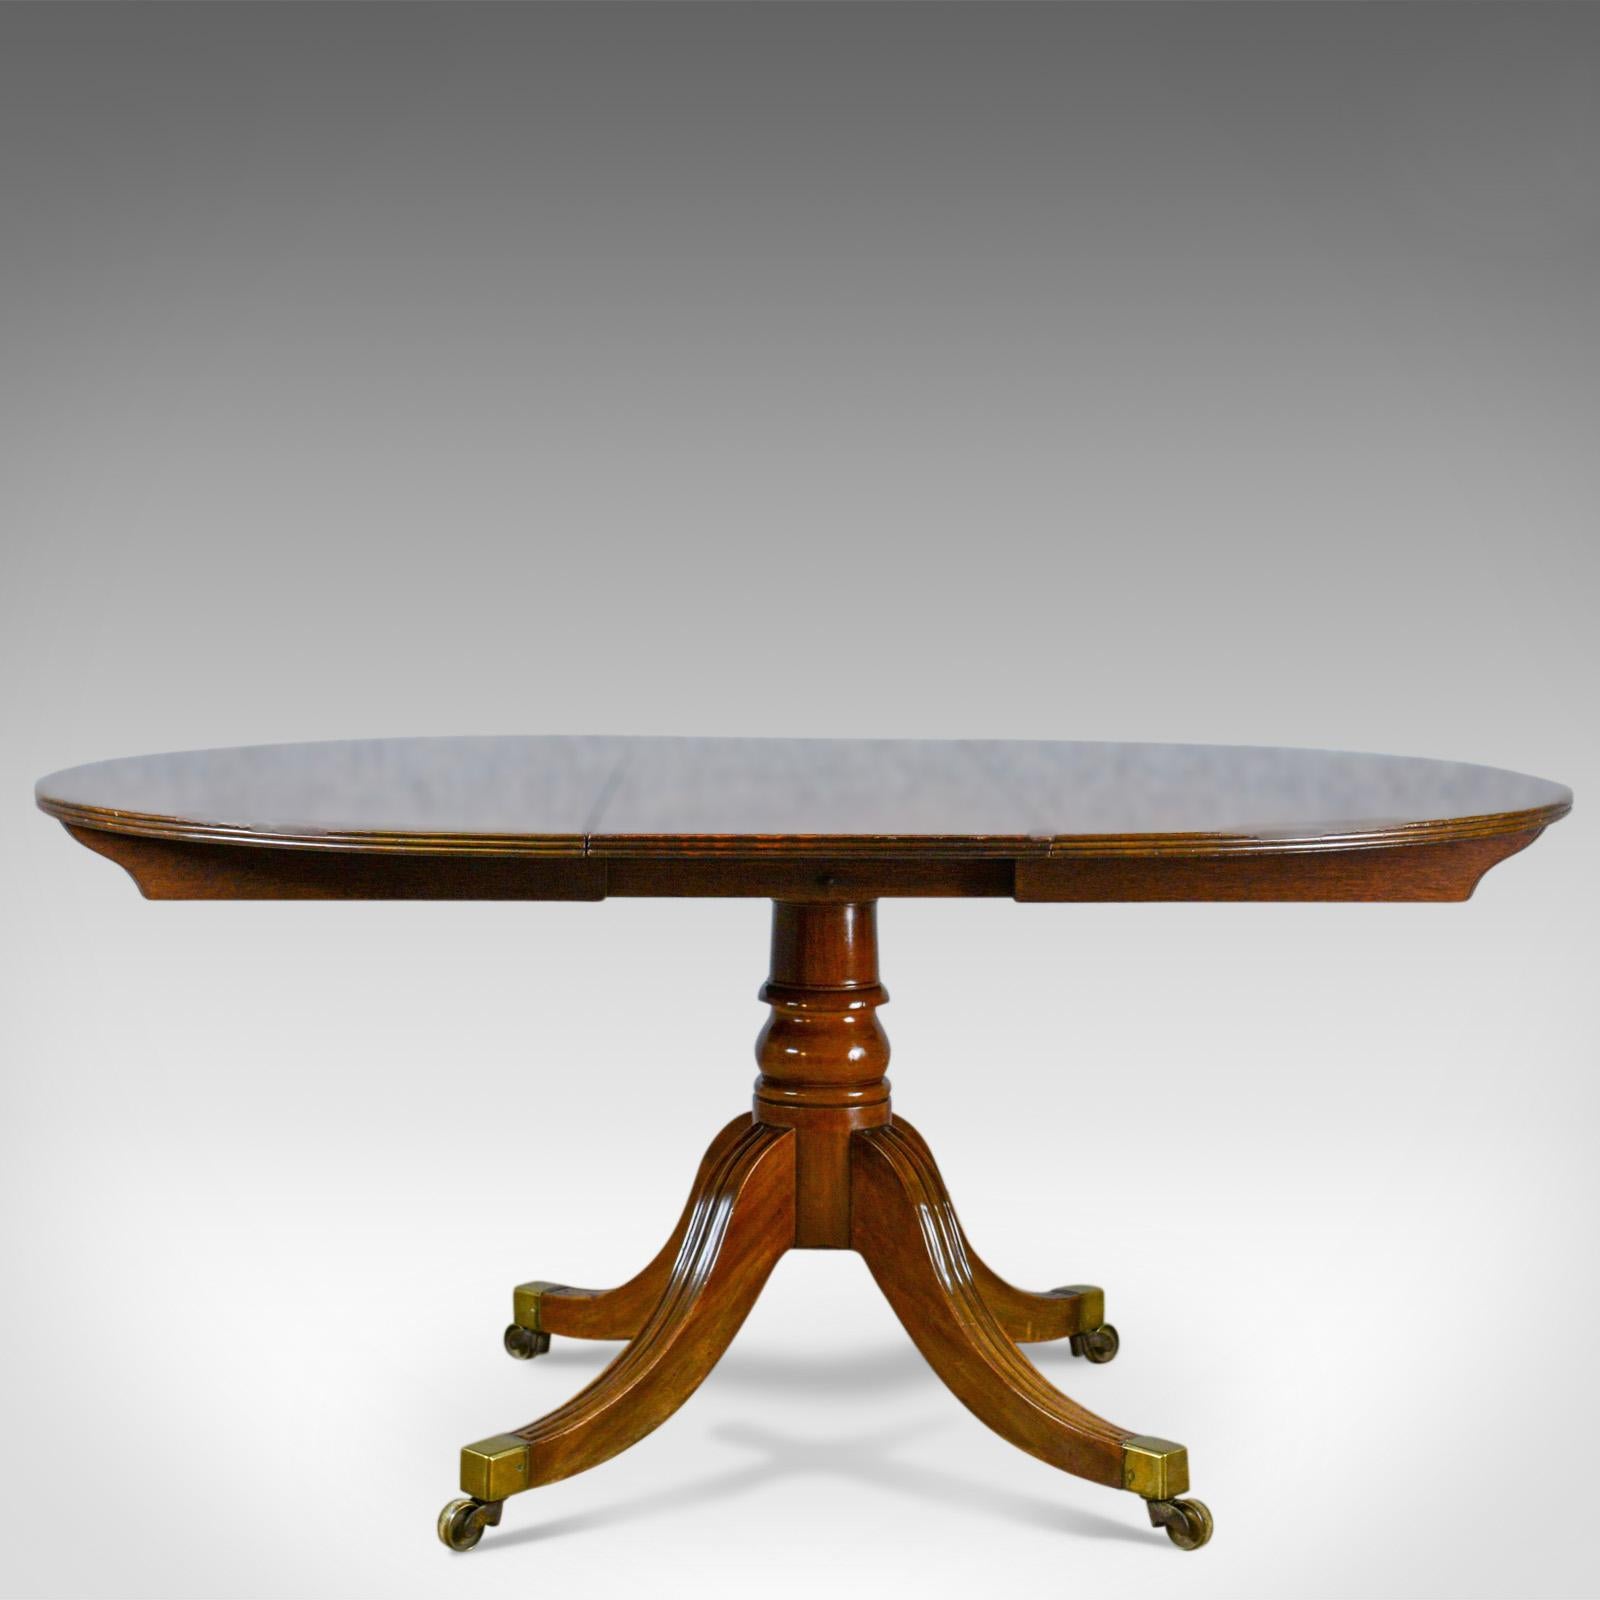 This is an antique dining table, an English, late Regency extending table seating four to six, in mahogany and dating to the early 19th century, circa 1820.

Quality mahogany presenting good color and grain interest
Single extension leaf in good